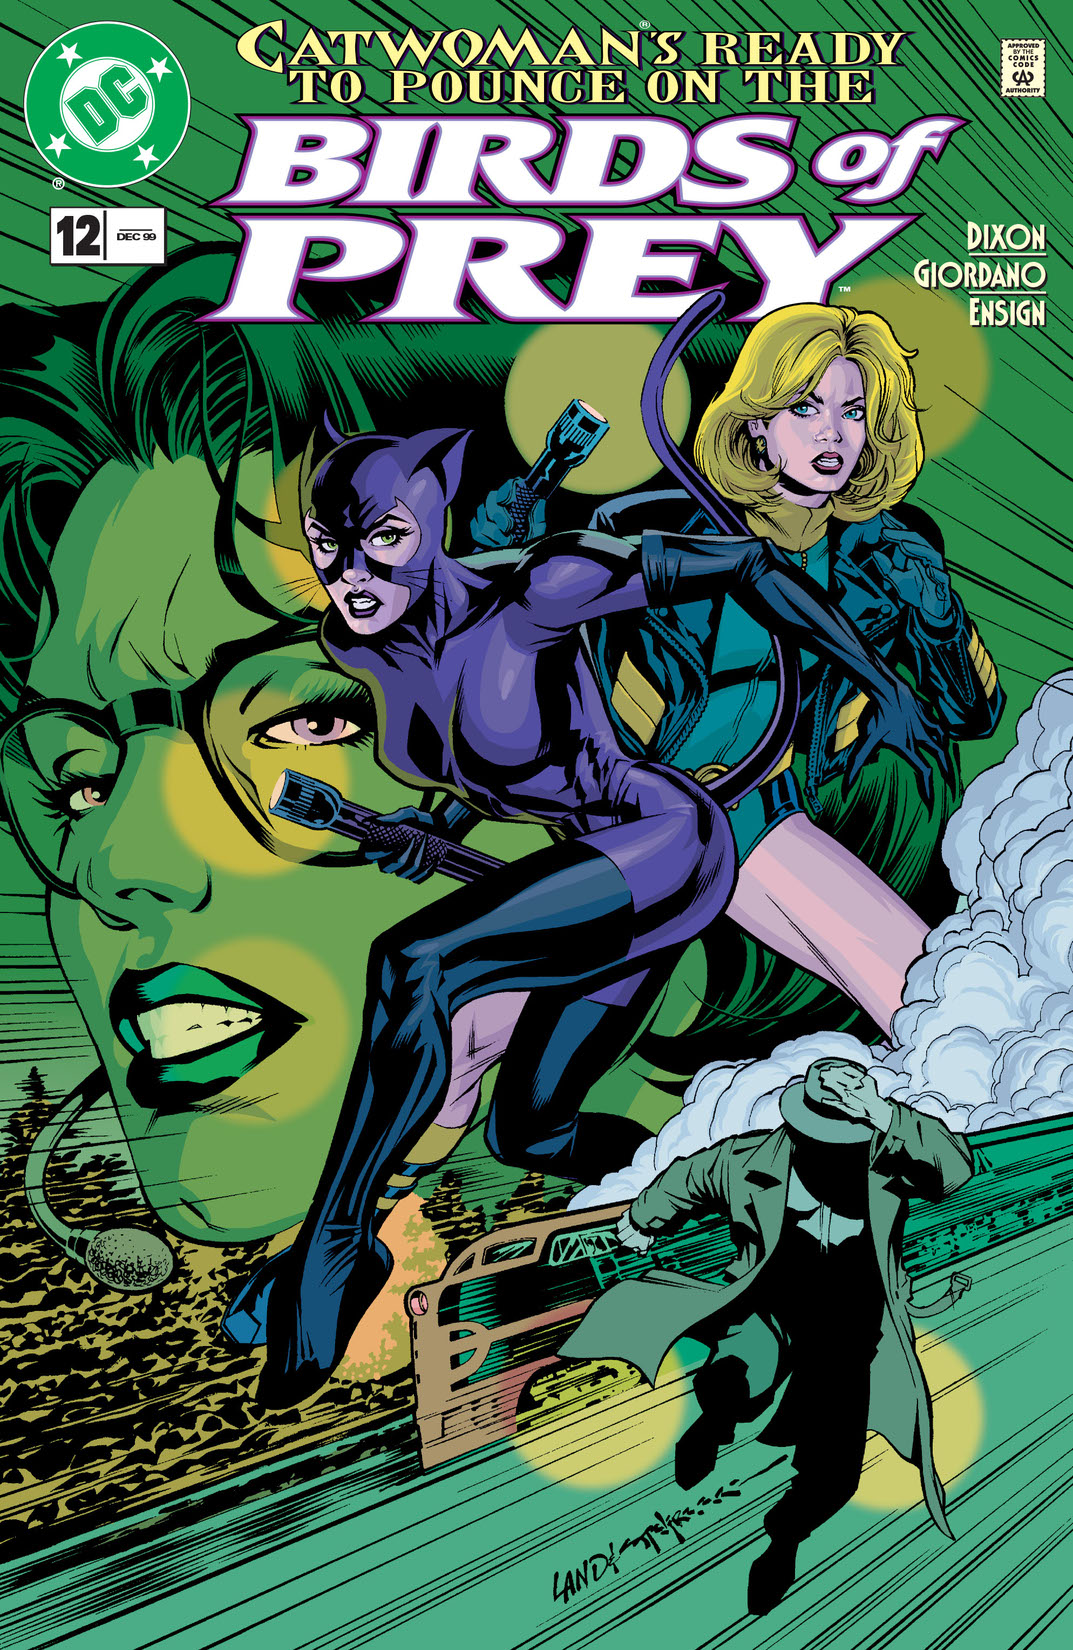 Birds of Prey (1998-) #12 preview images